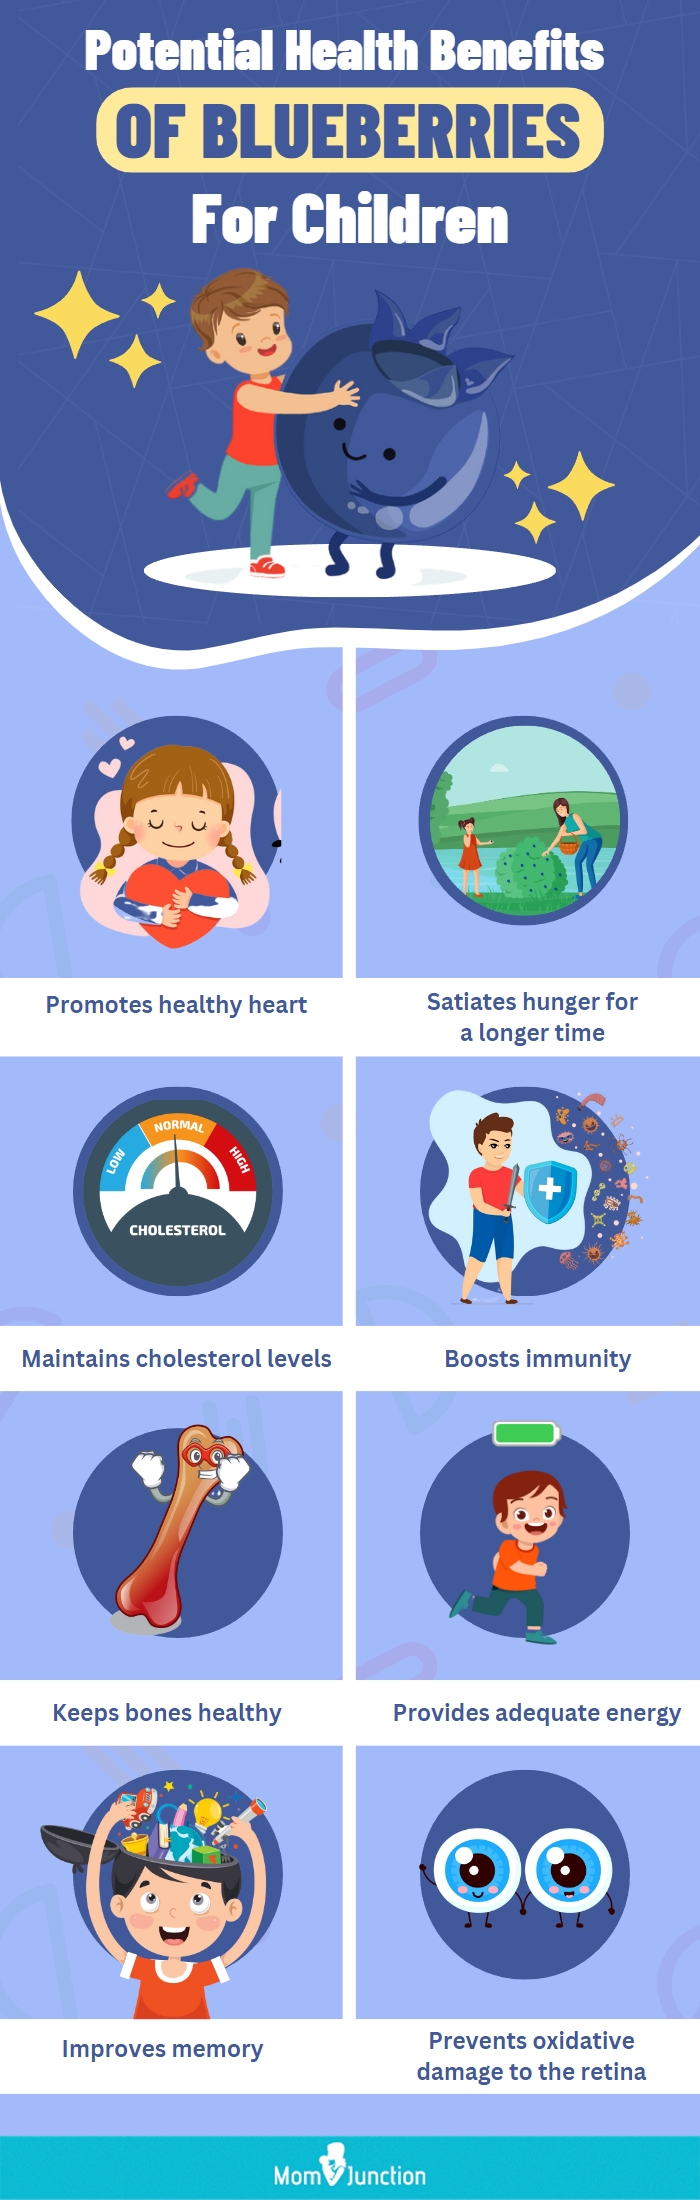 potential health benefits of blueberries in children (infographic)